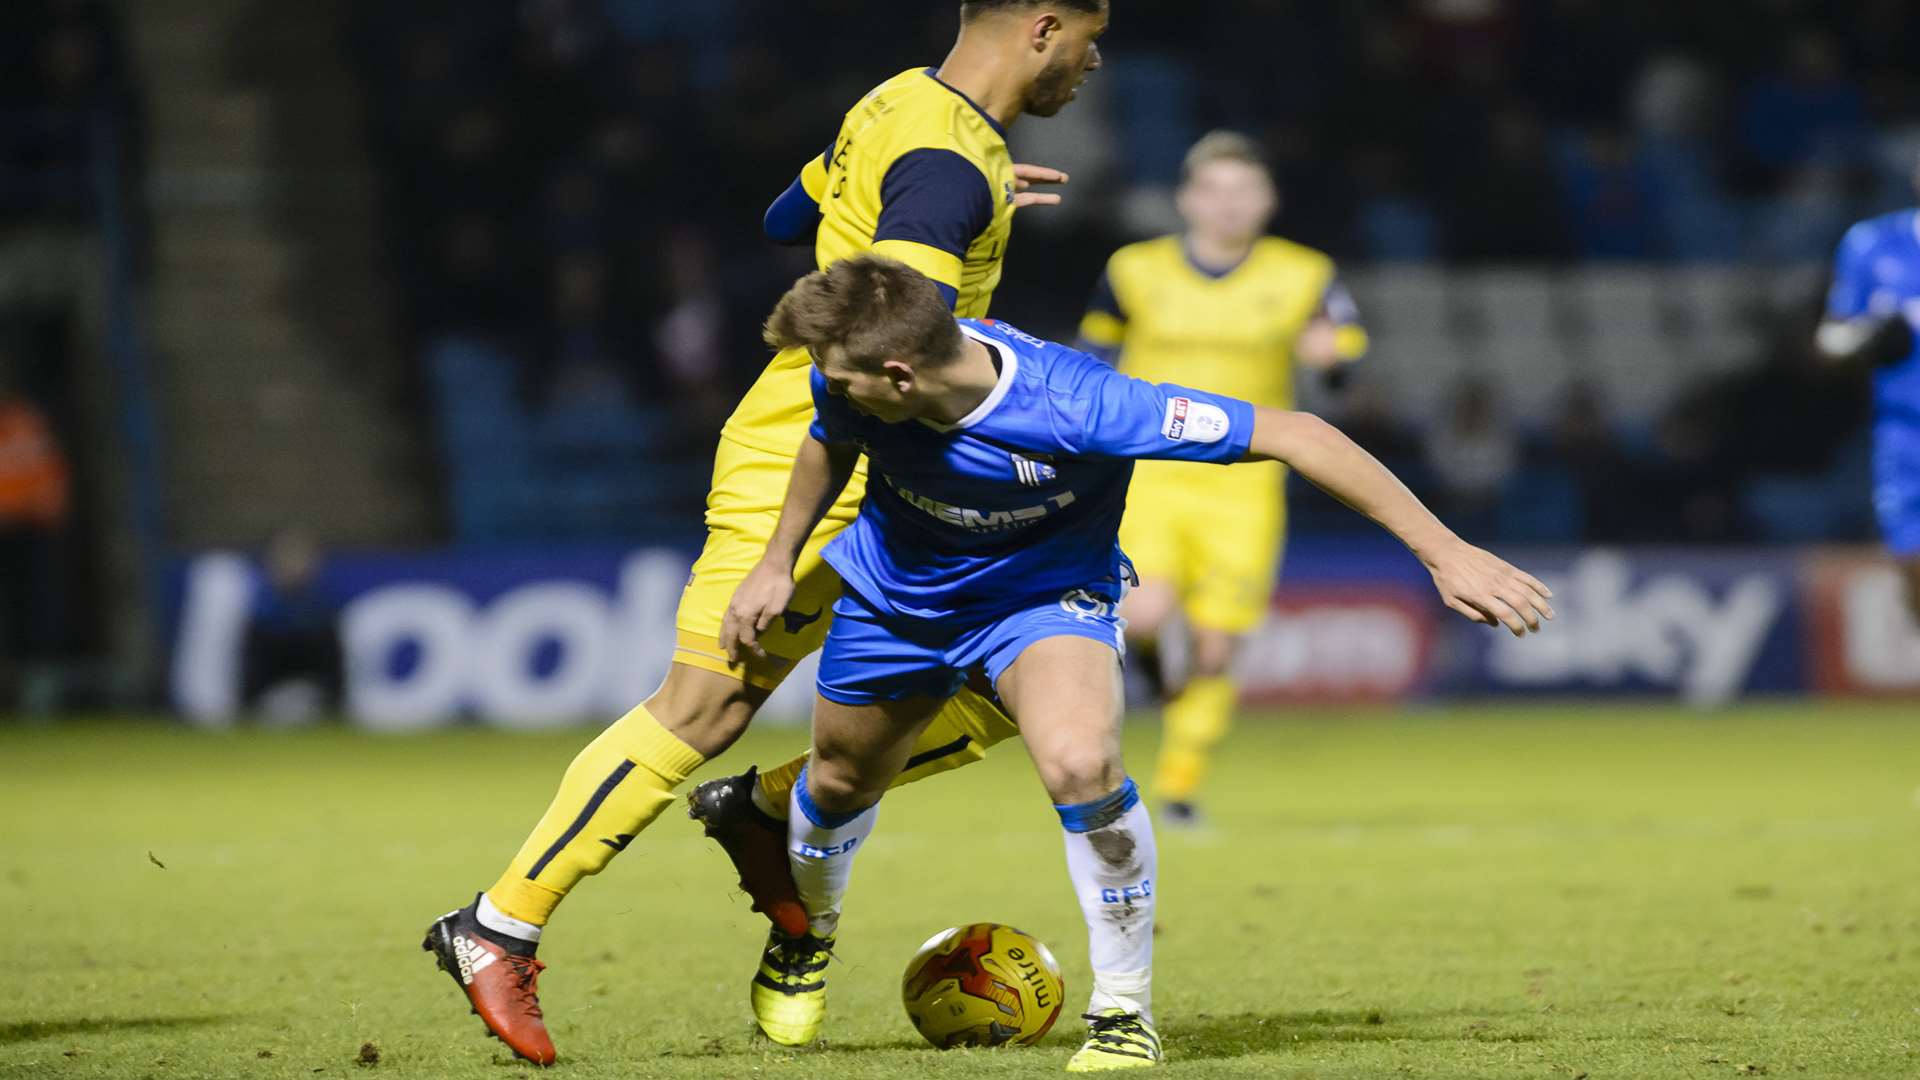 Jake Hessenthaler gets in a tangle Picture: Andy Payton